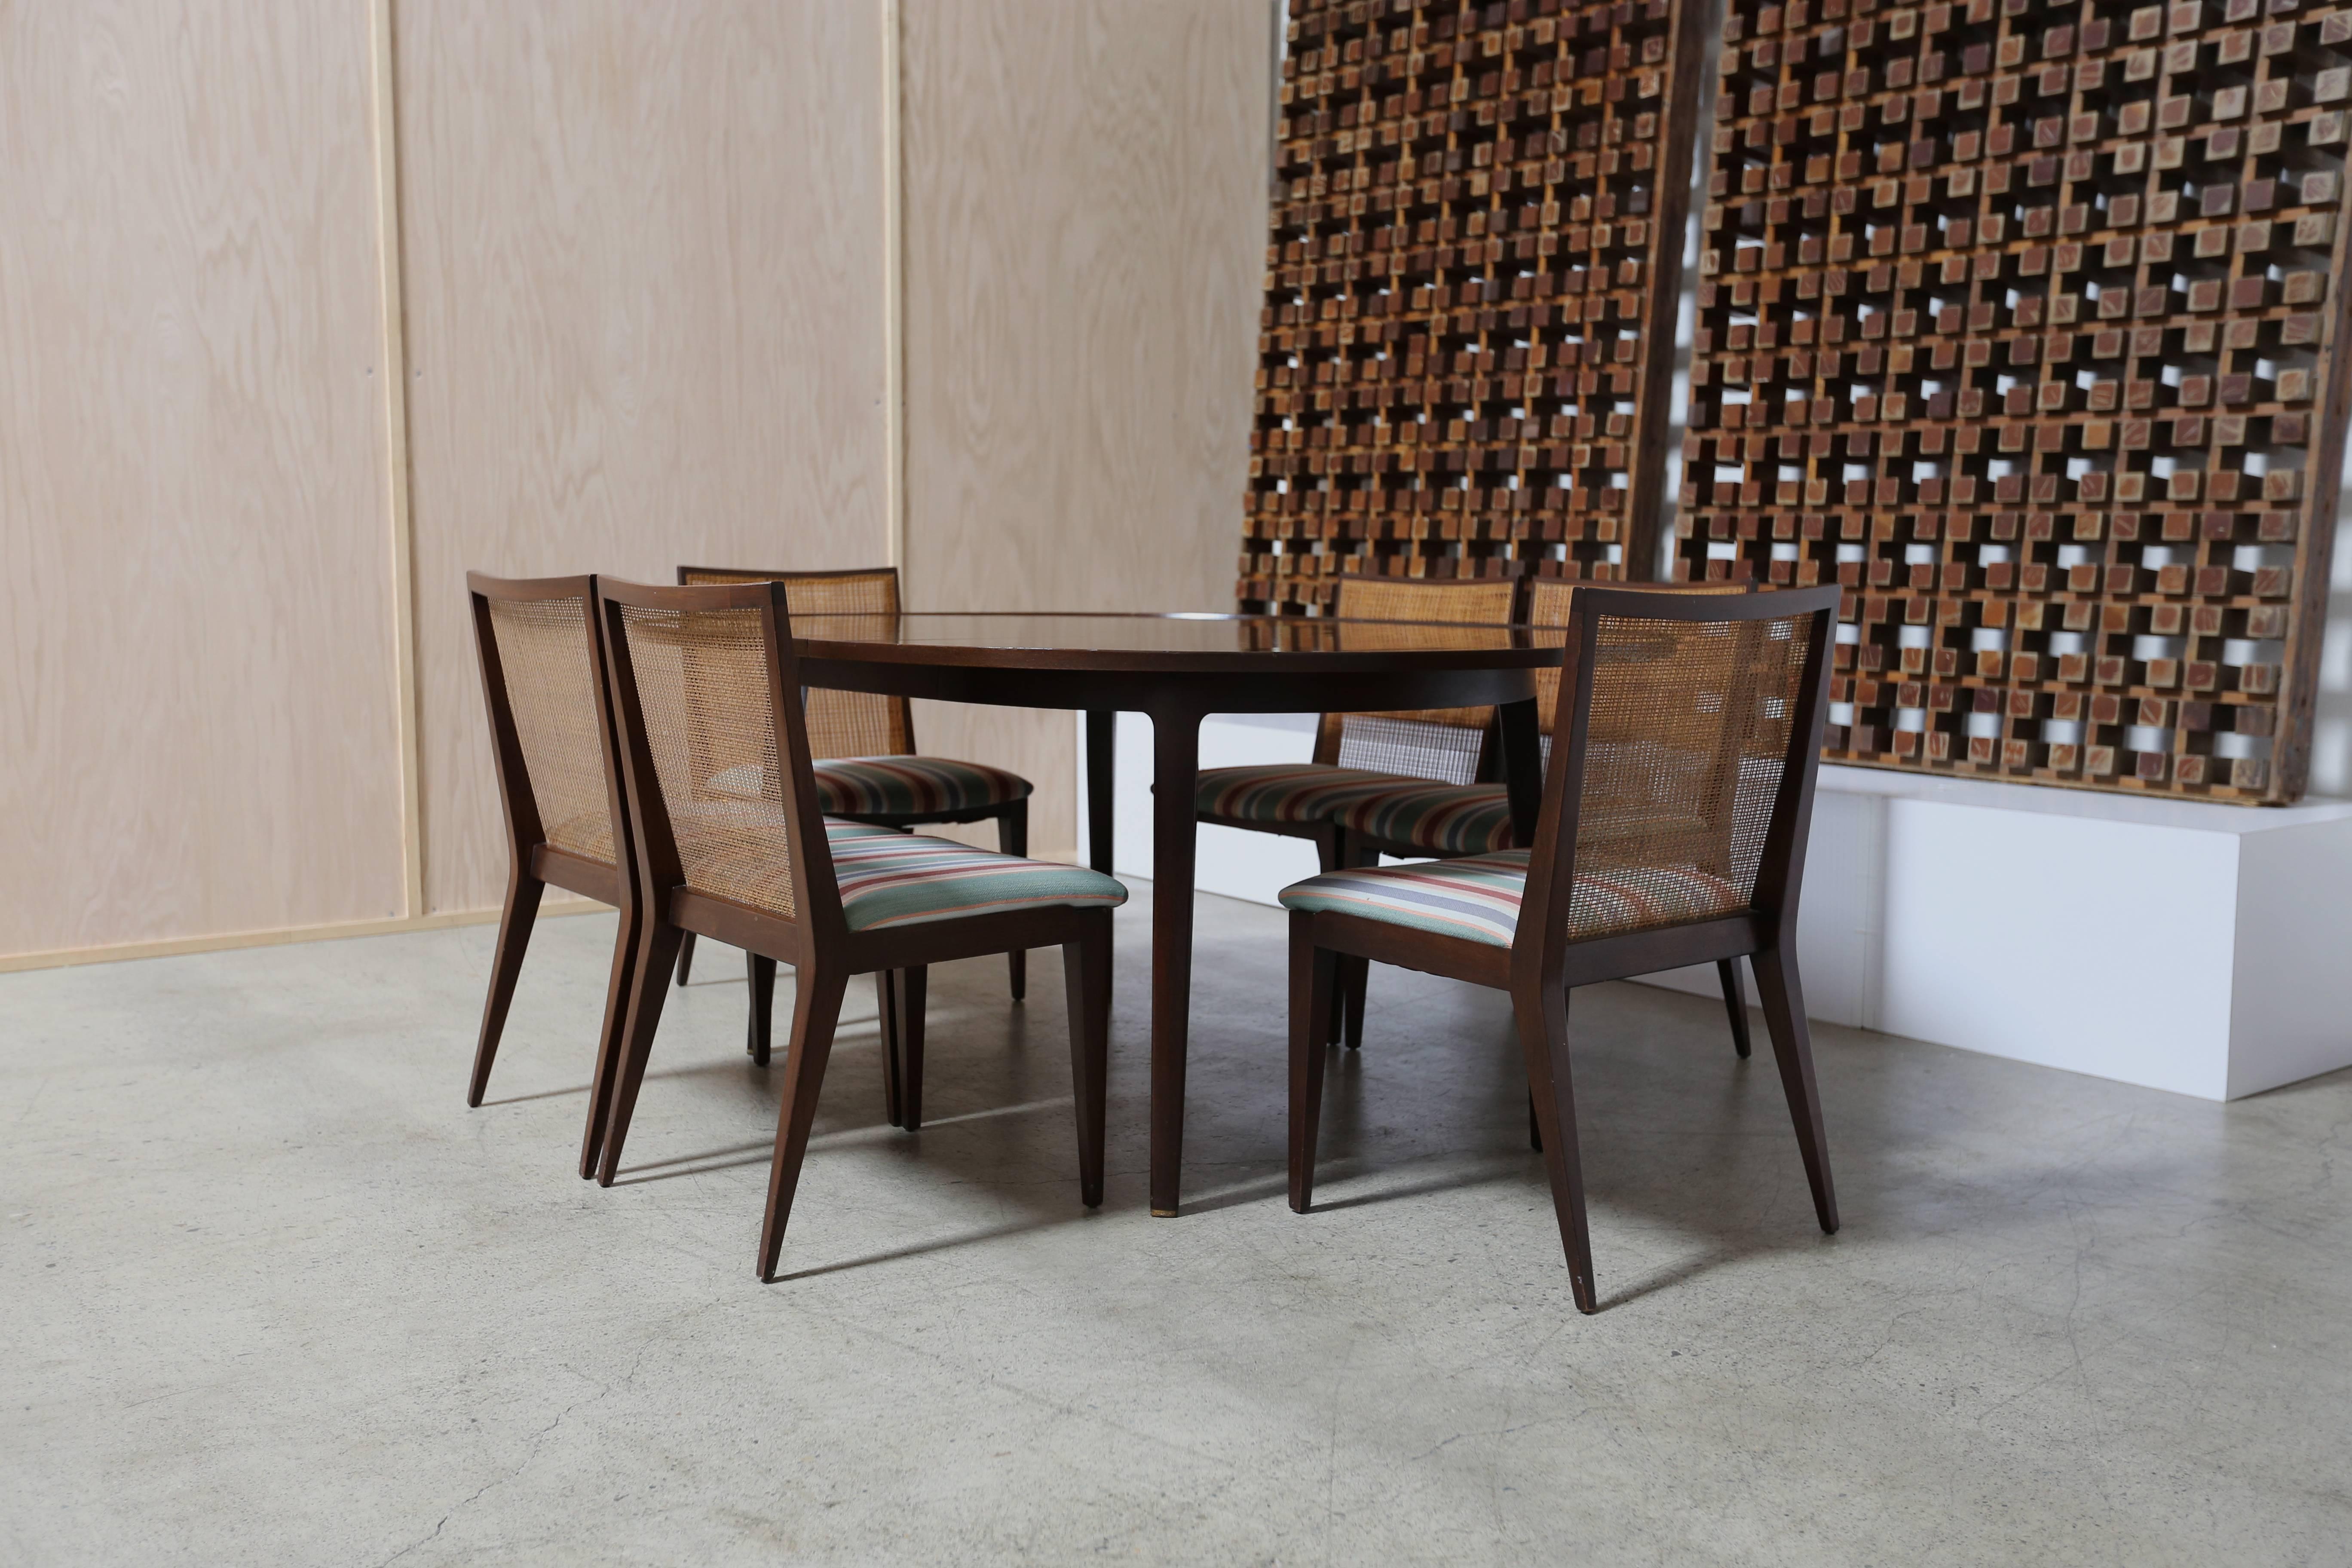 Dining set by Edward Wormley for Dunbar. Dining table with one leaf and six dining chairs.